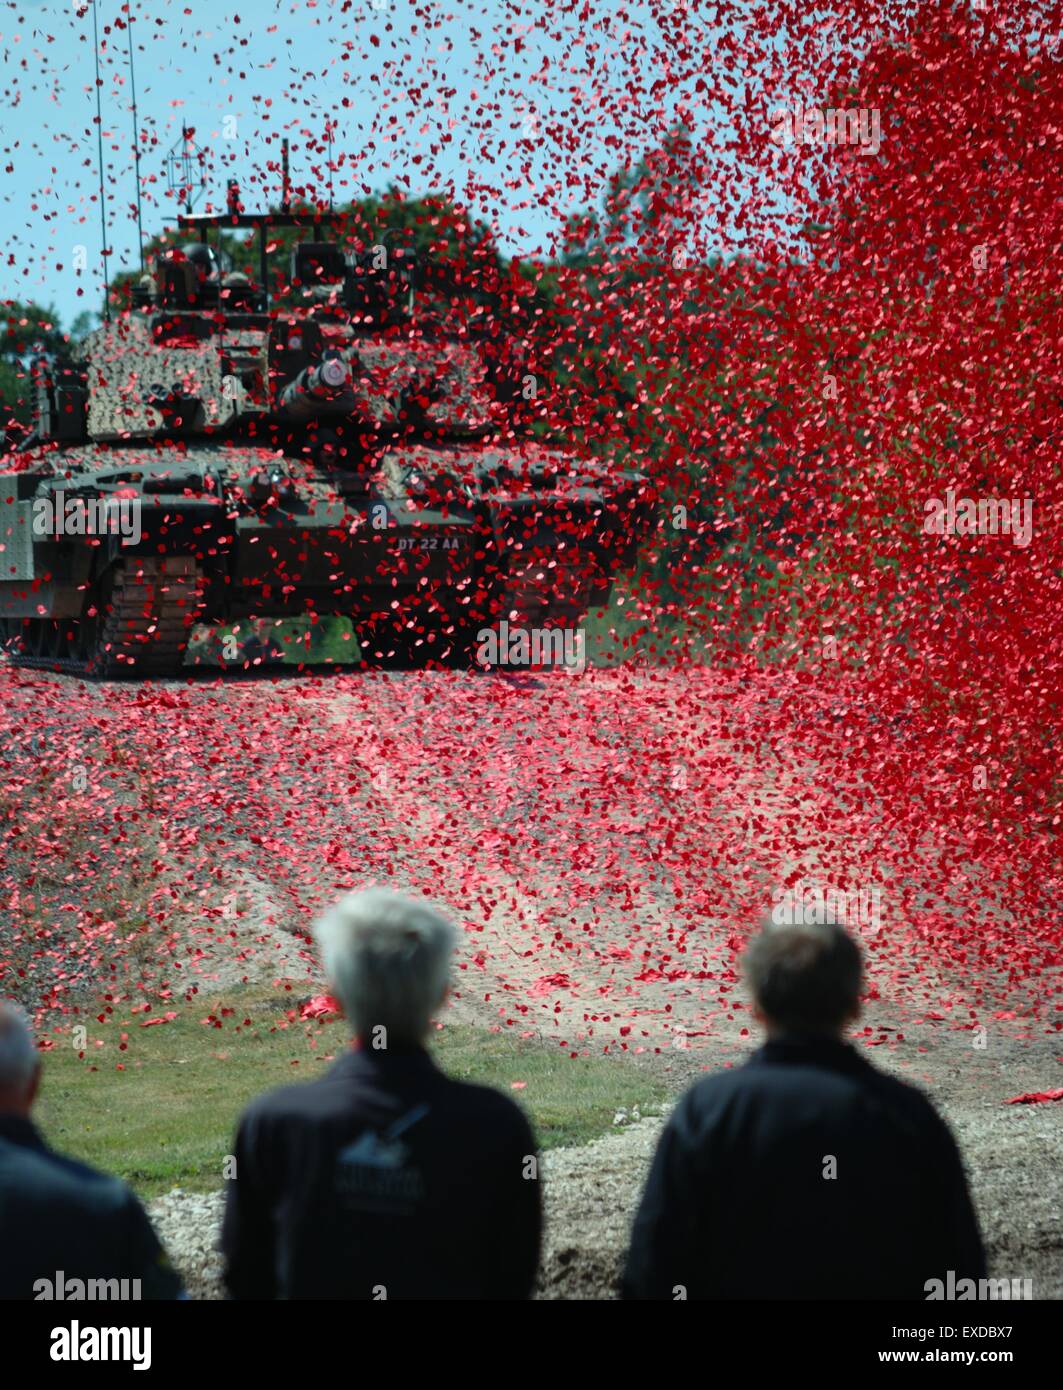 Poppies shroud a tank during First World War centenary event at Bovington Tank Museum, Dorset, UK, 2014 while people look on during a ceremony Stock Photo